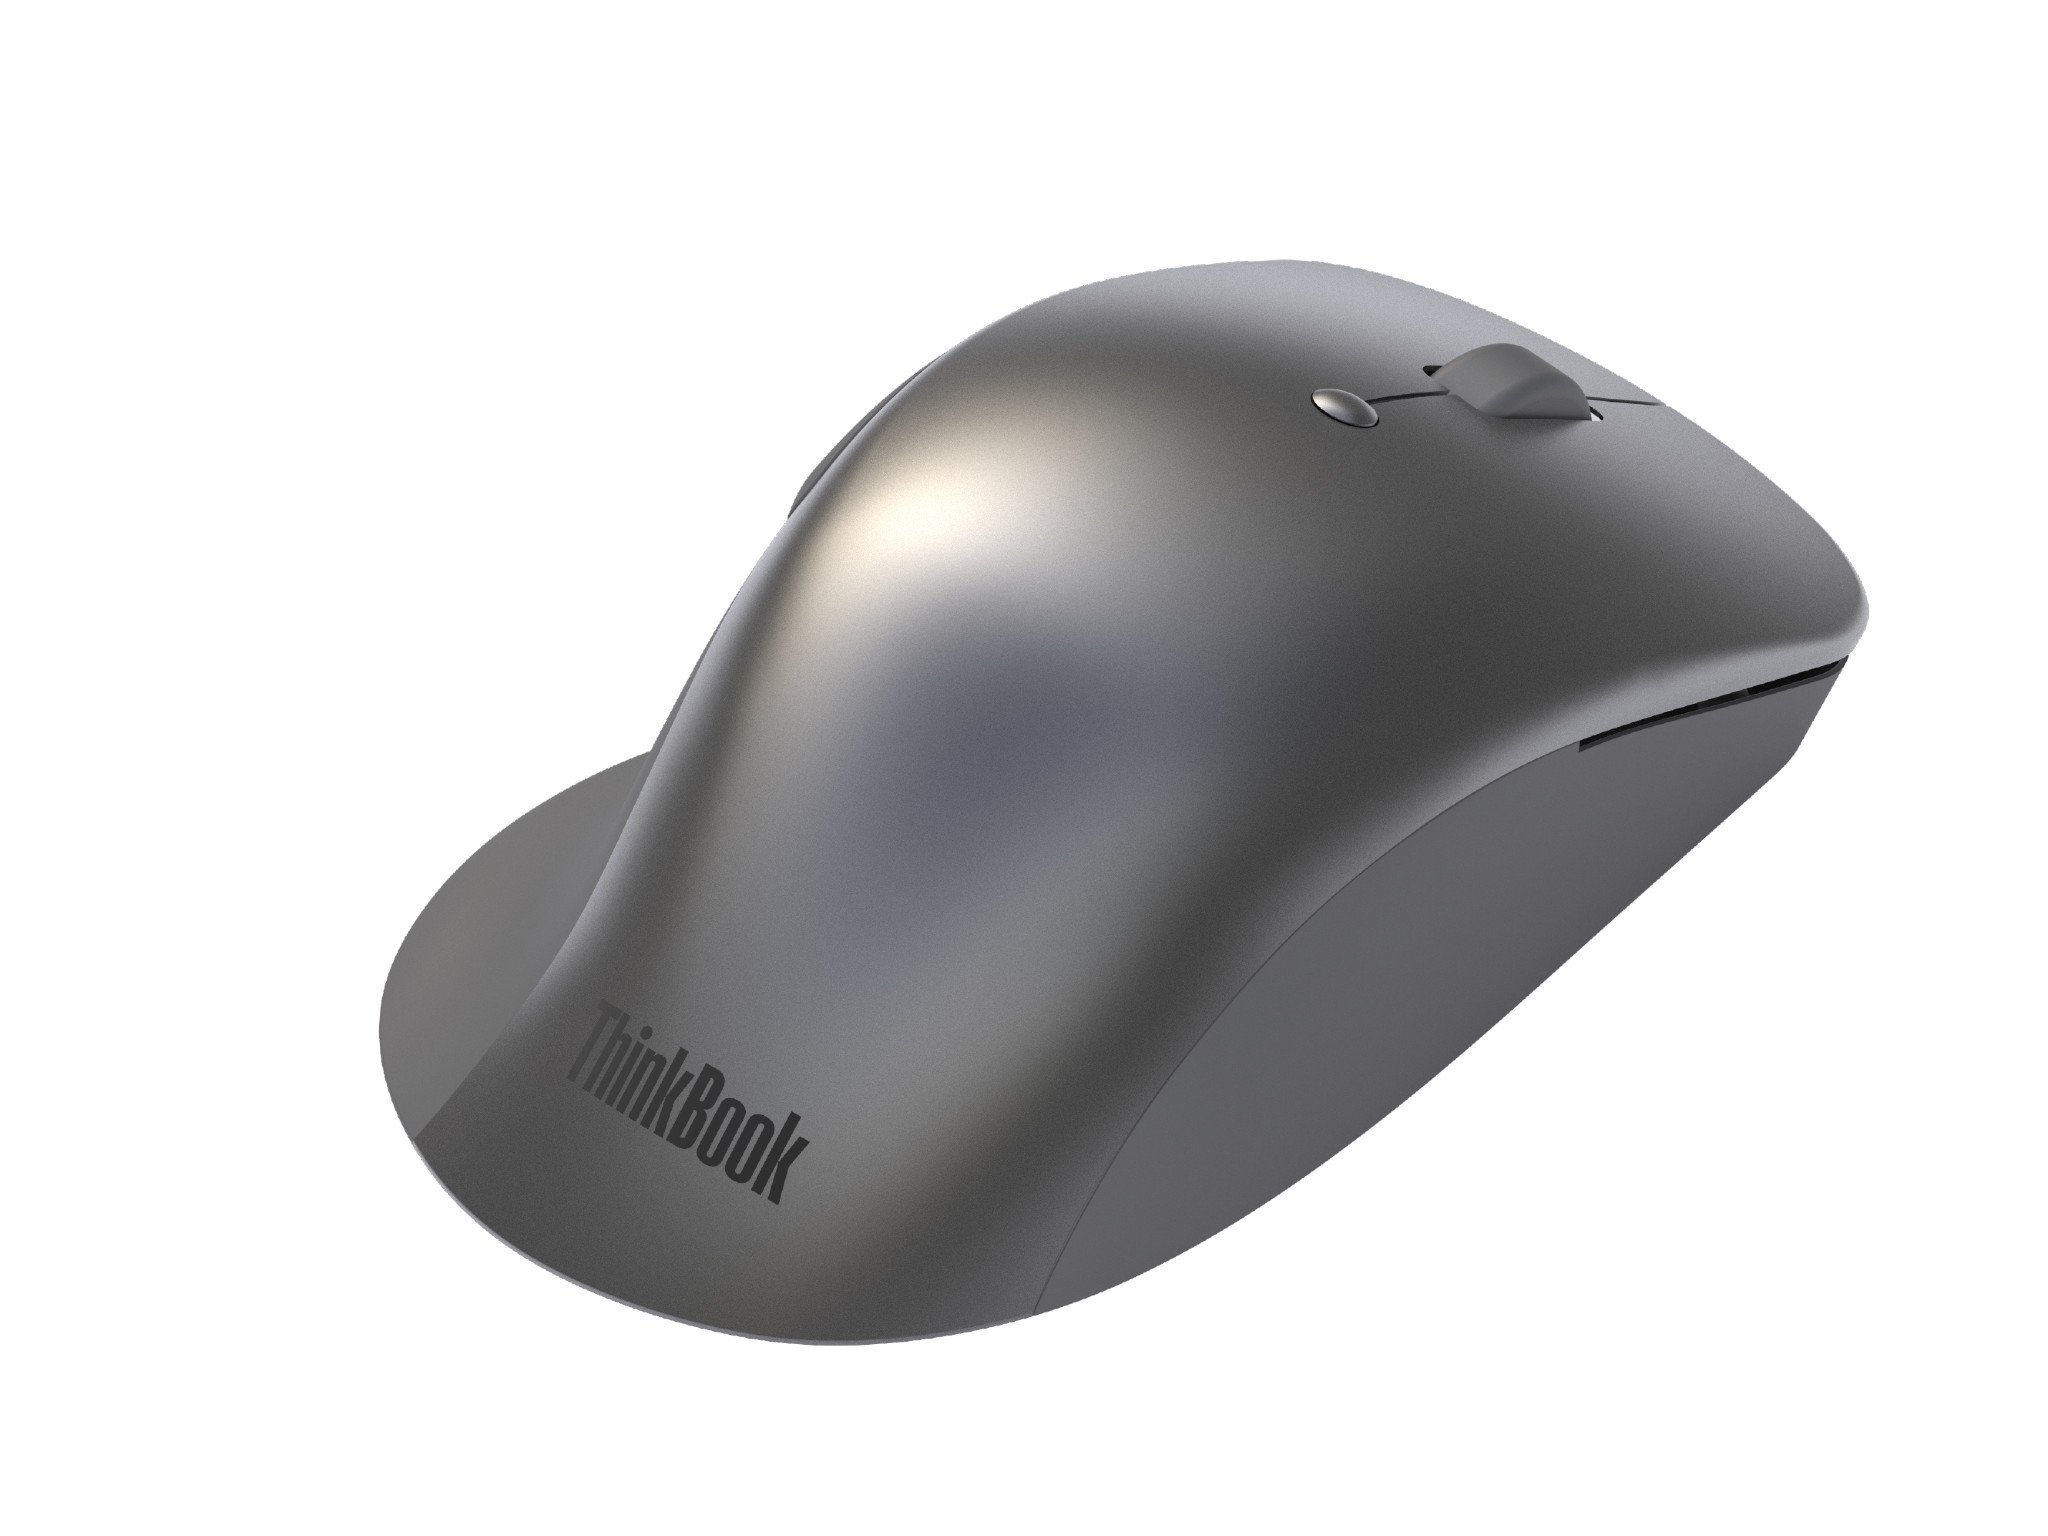 Thinkbook Performance Mouse